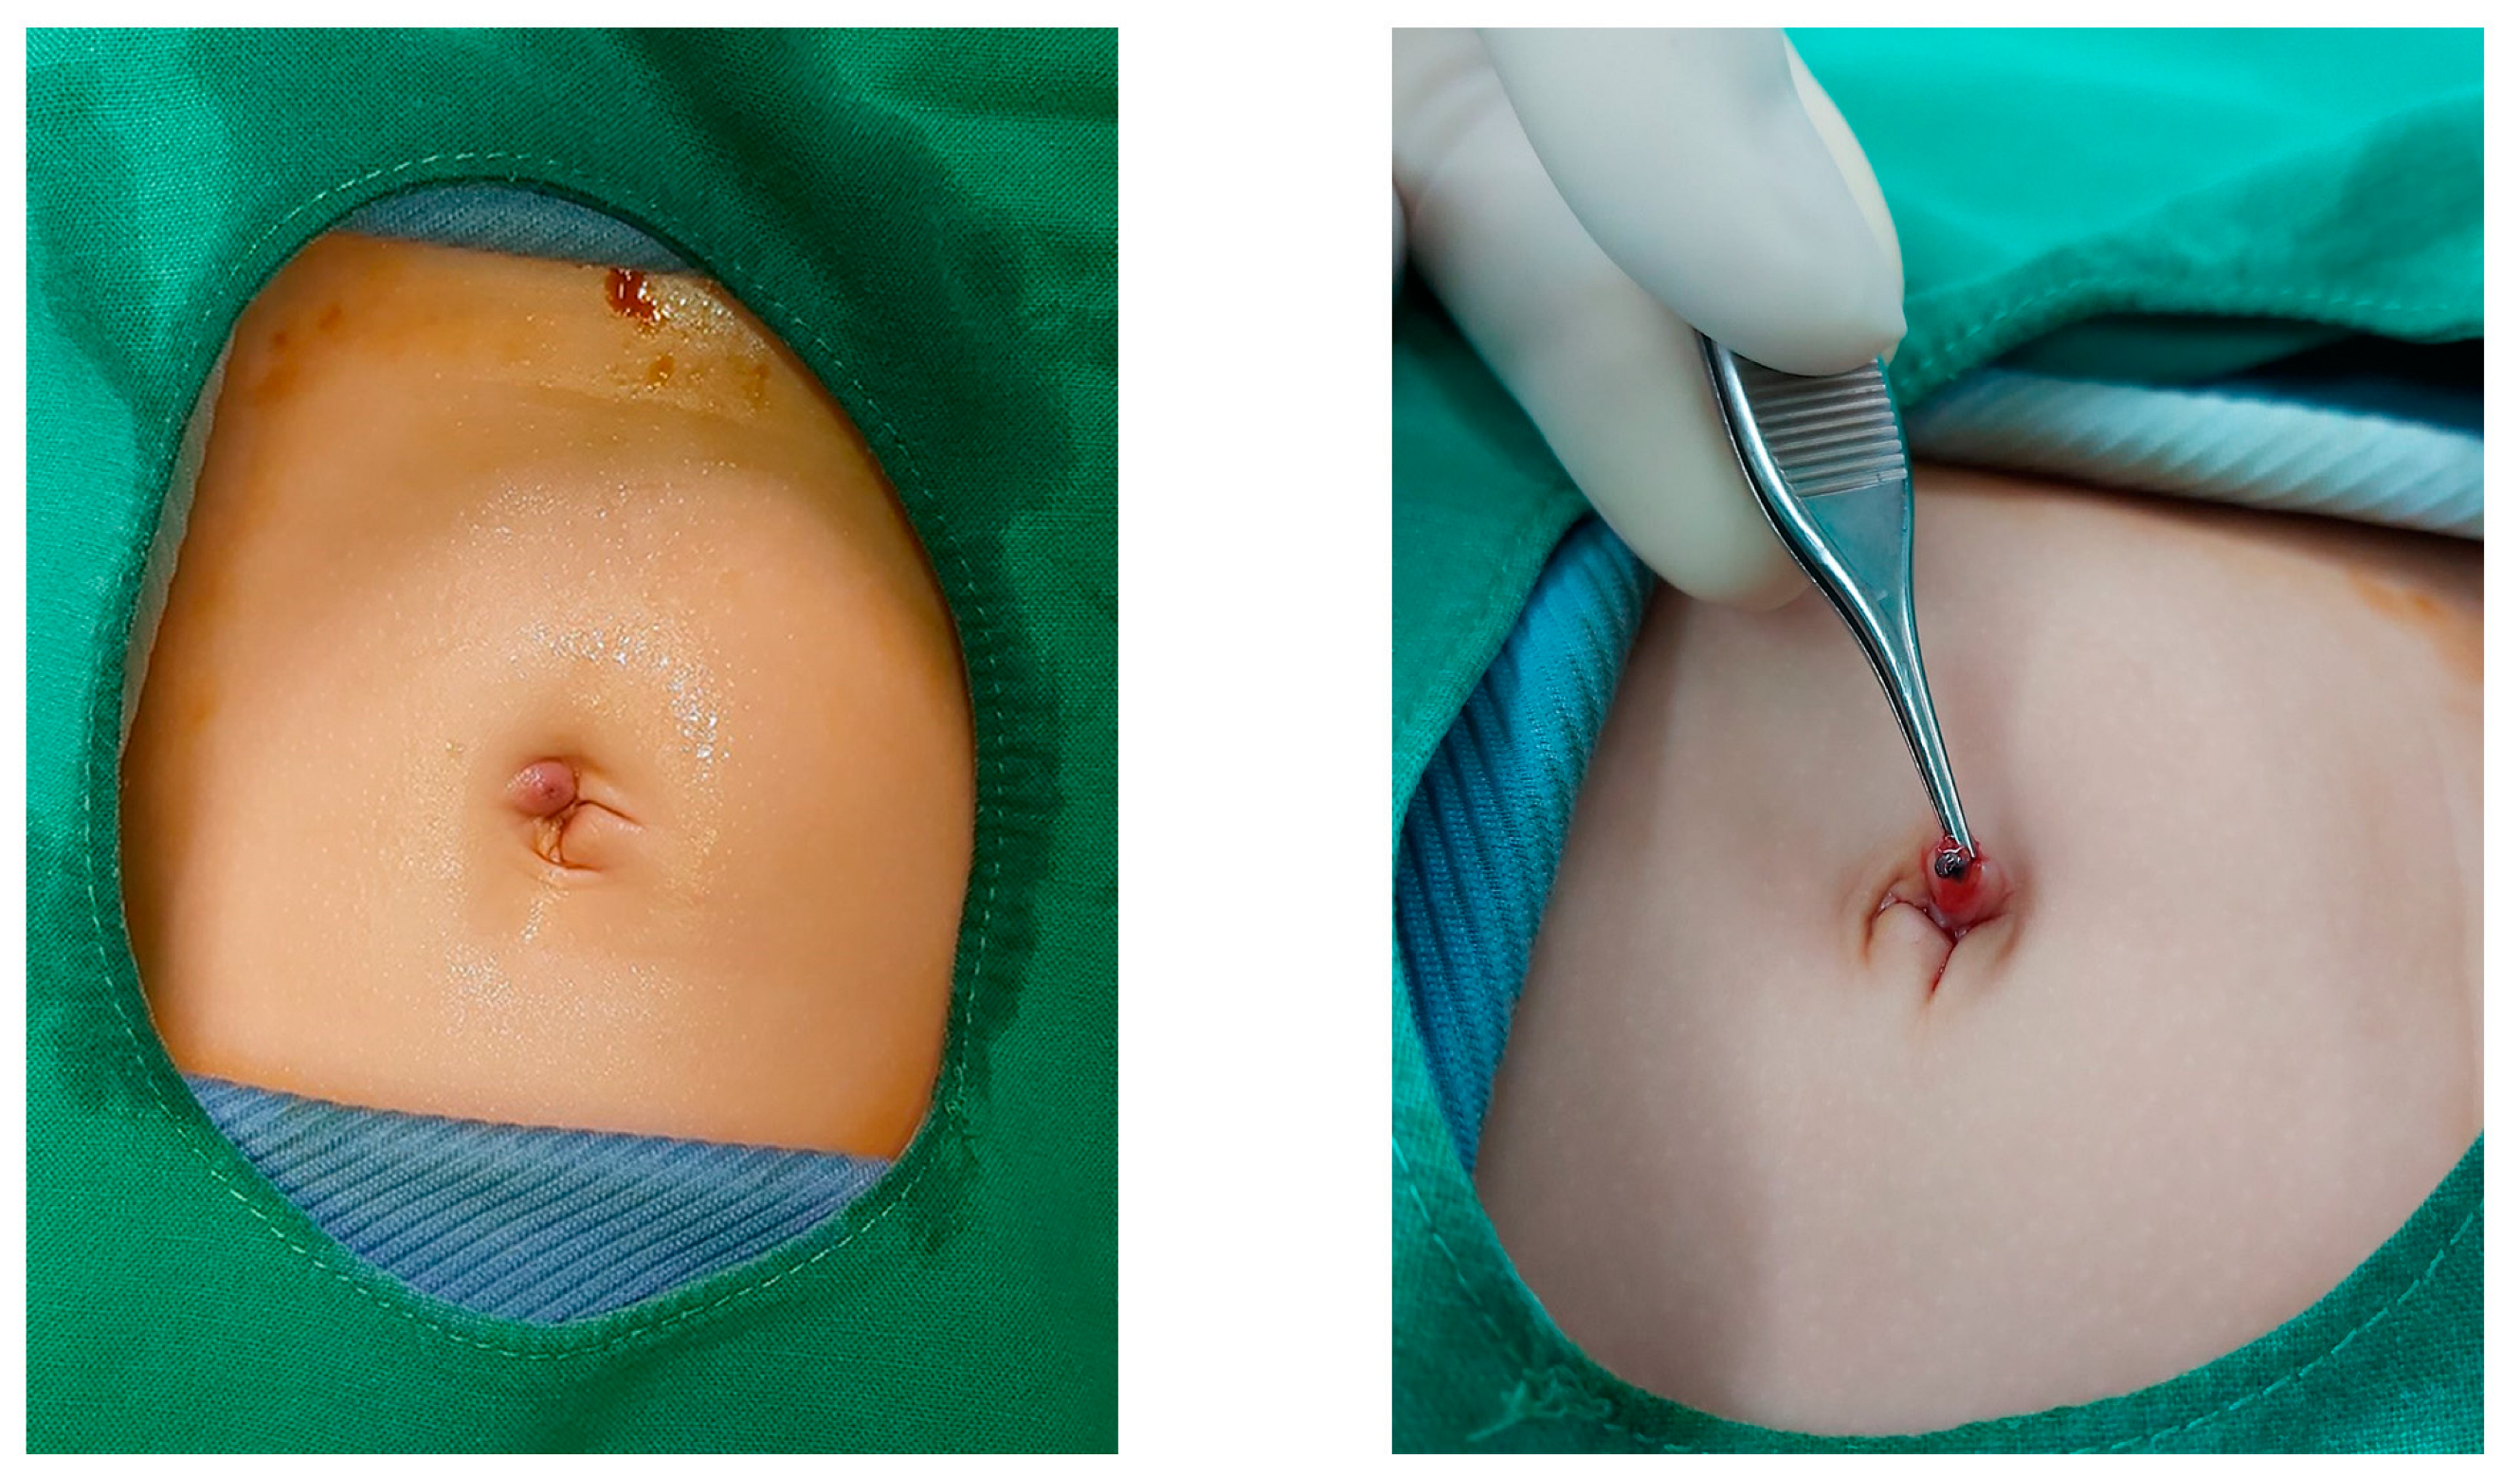 Needlescopic surgery for large umbilical hernia in a patient with